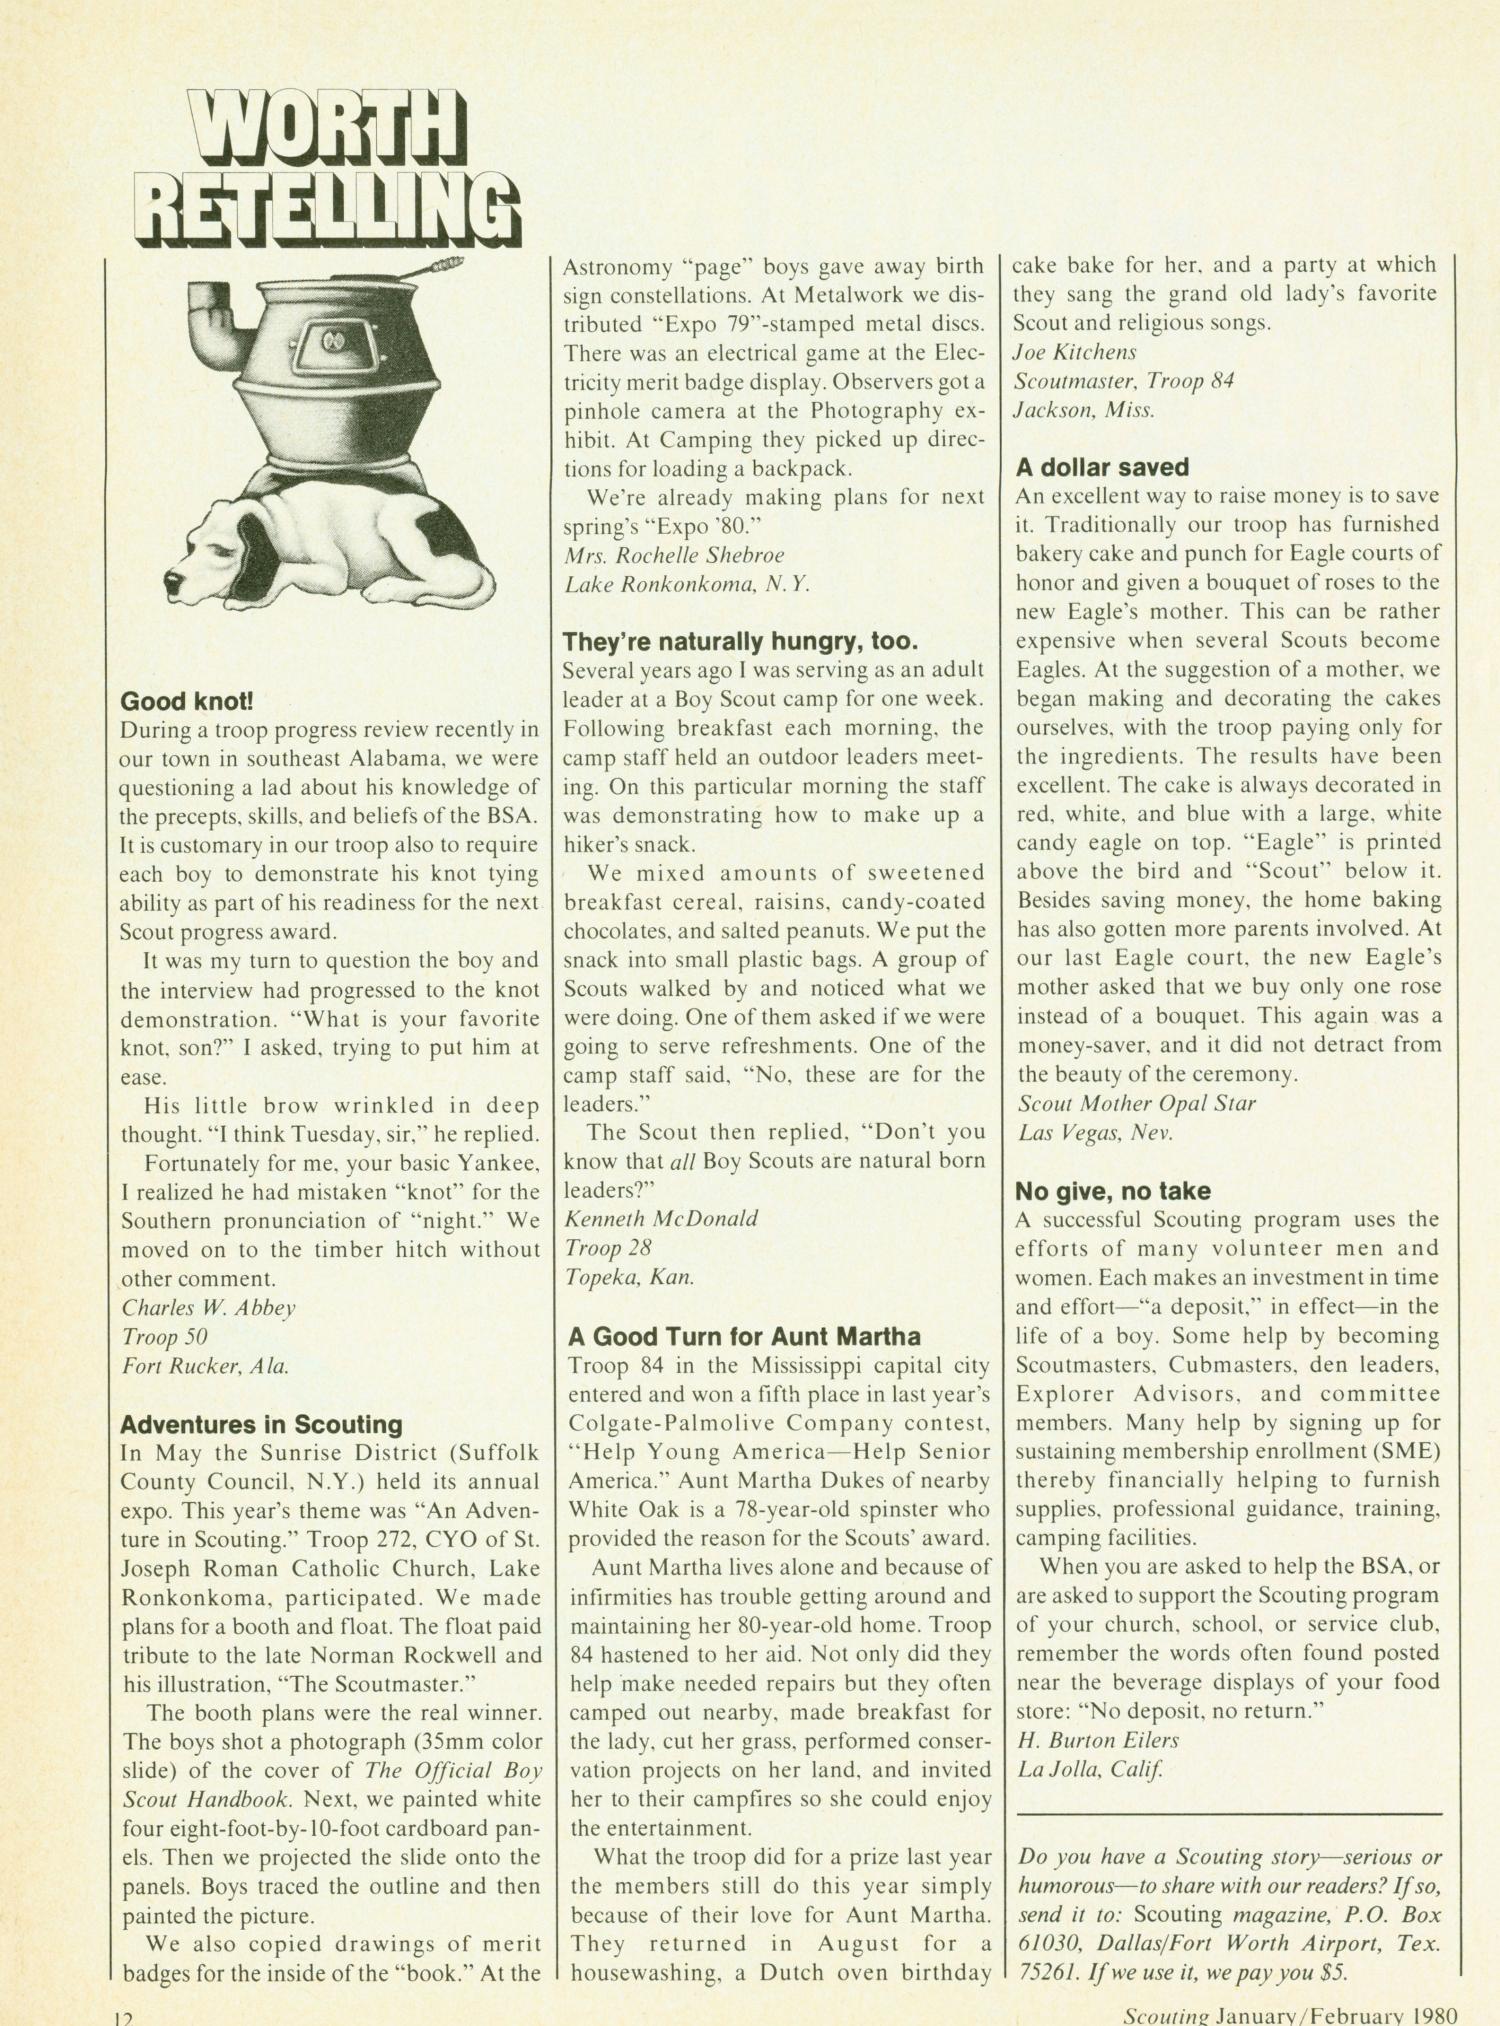 Scouting, Volume 68, Number 1, January-February 1980
                                                
                                                    12
                                                